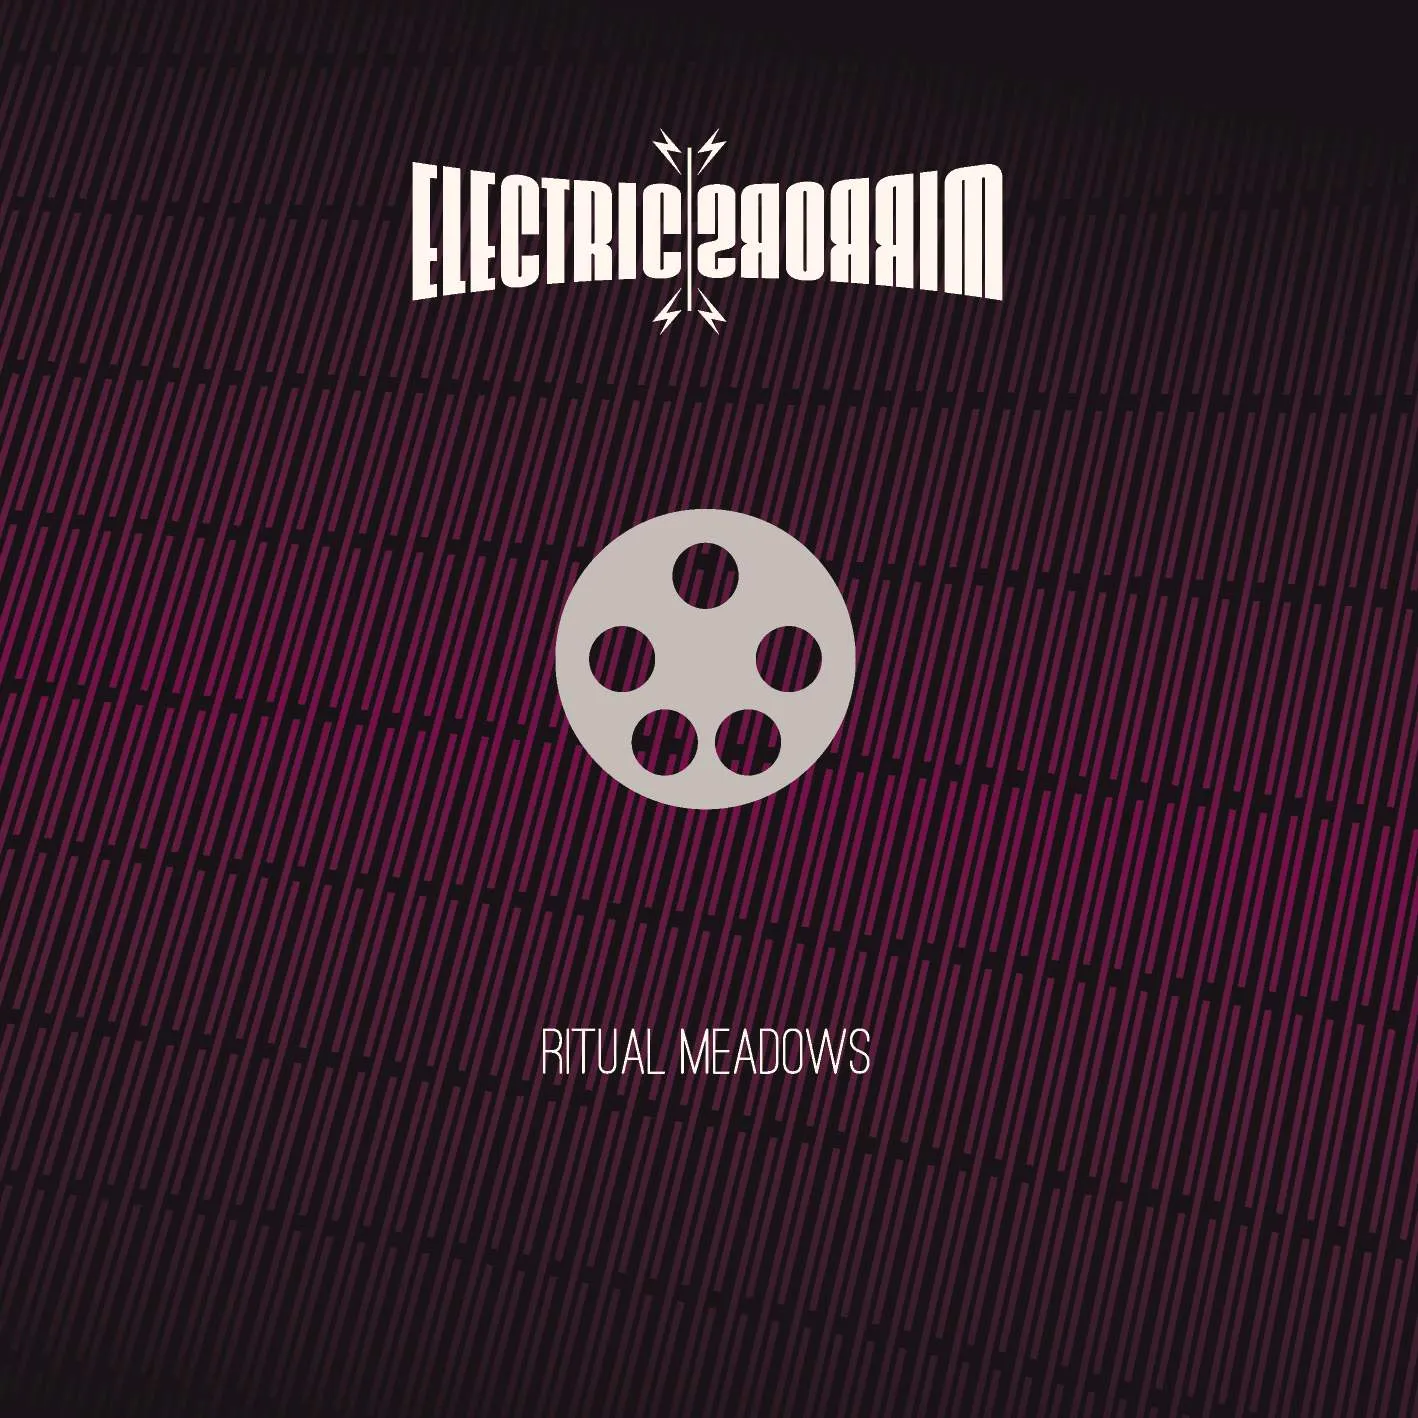 Album cover for “Ritual Meadows” by Electric Mirrors